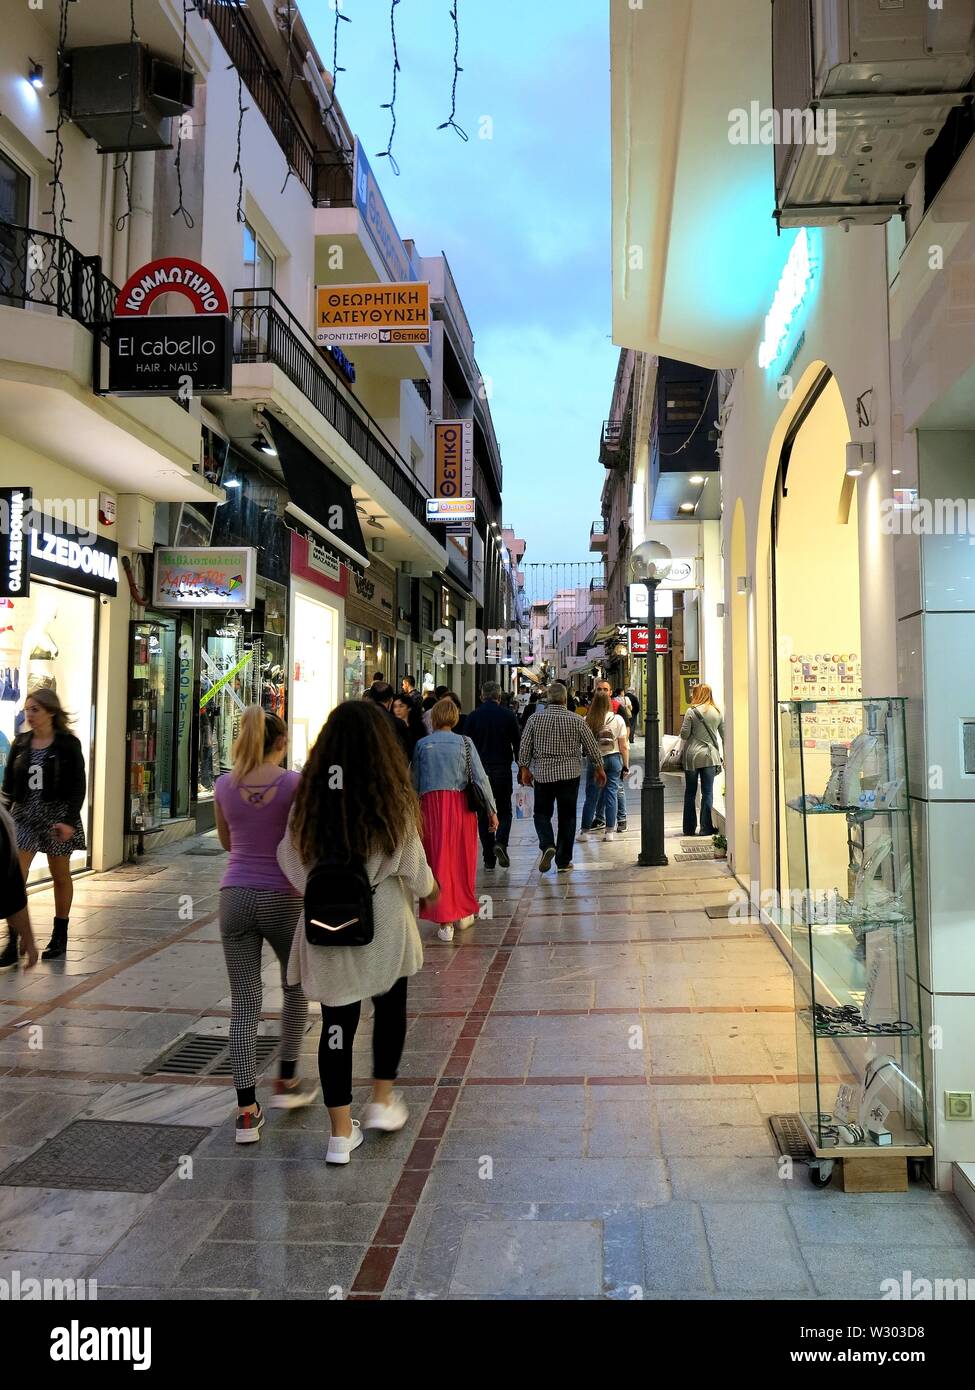 Street Life Heraklion Greece High Resolution Stock Photography and Images -  Alamy